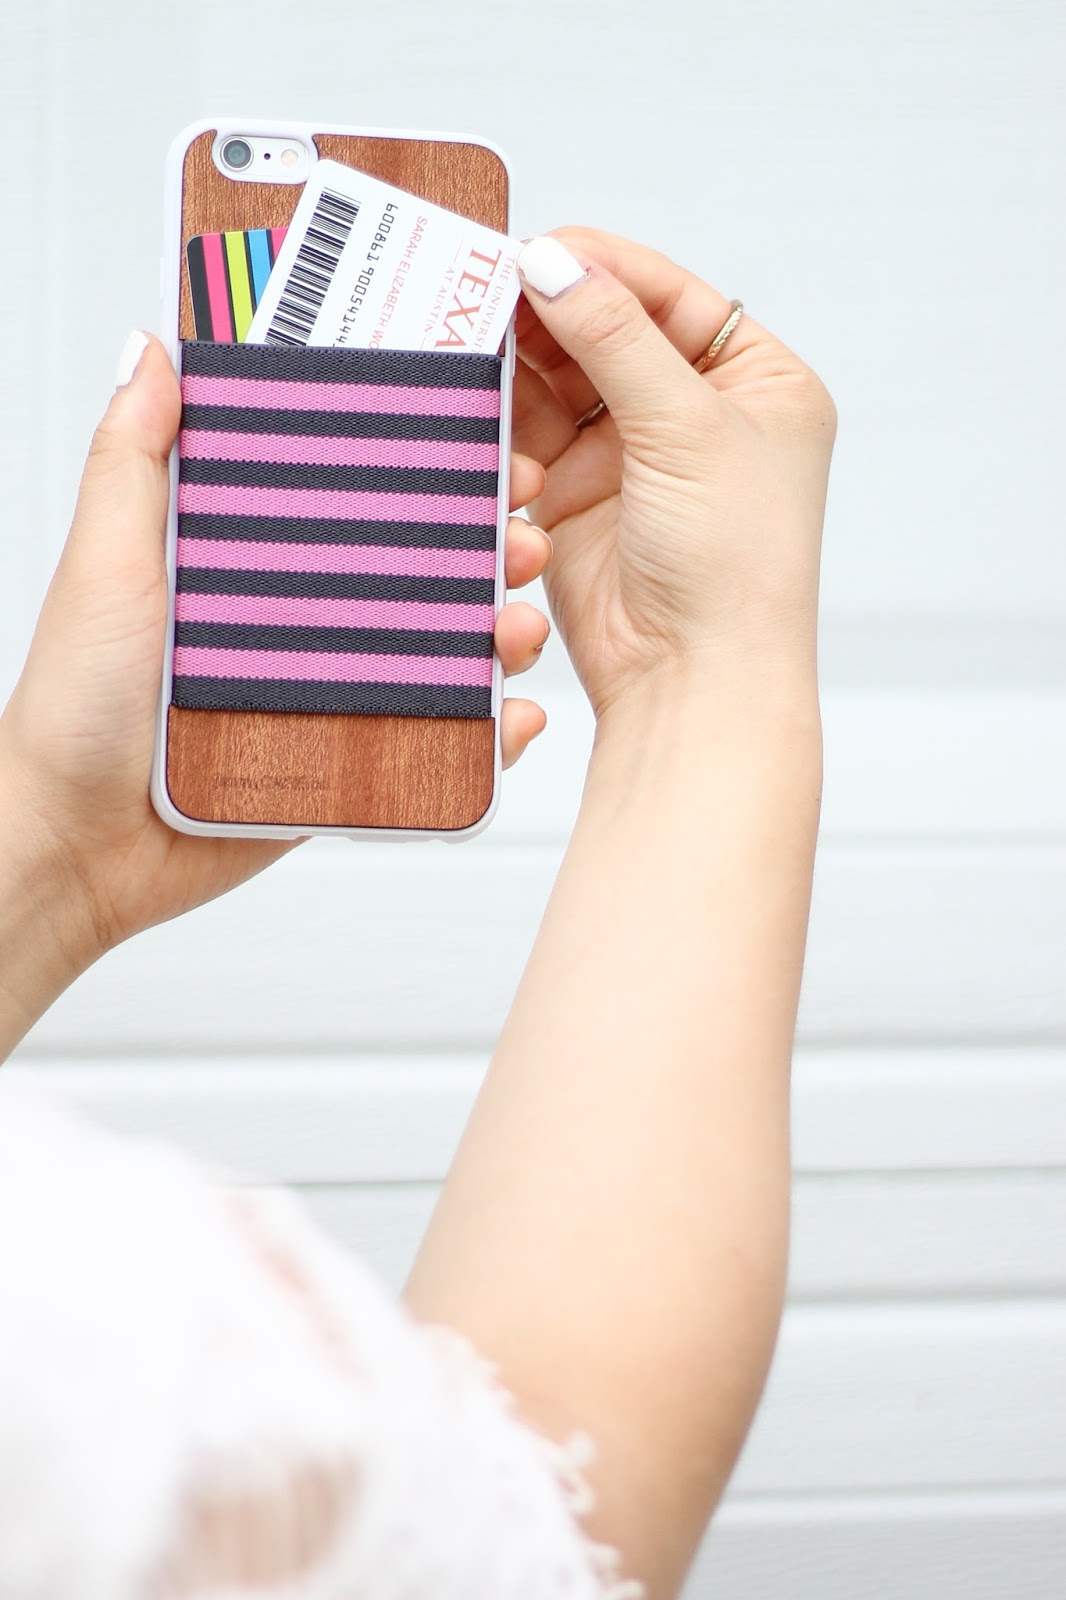 The Best Phone Case for College: jimmyCASE | www.thebellainsider.com